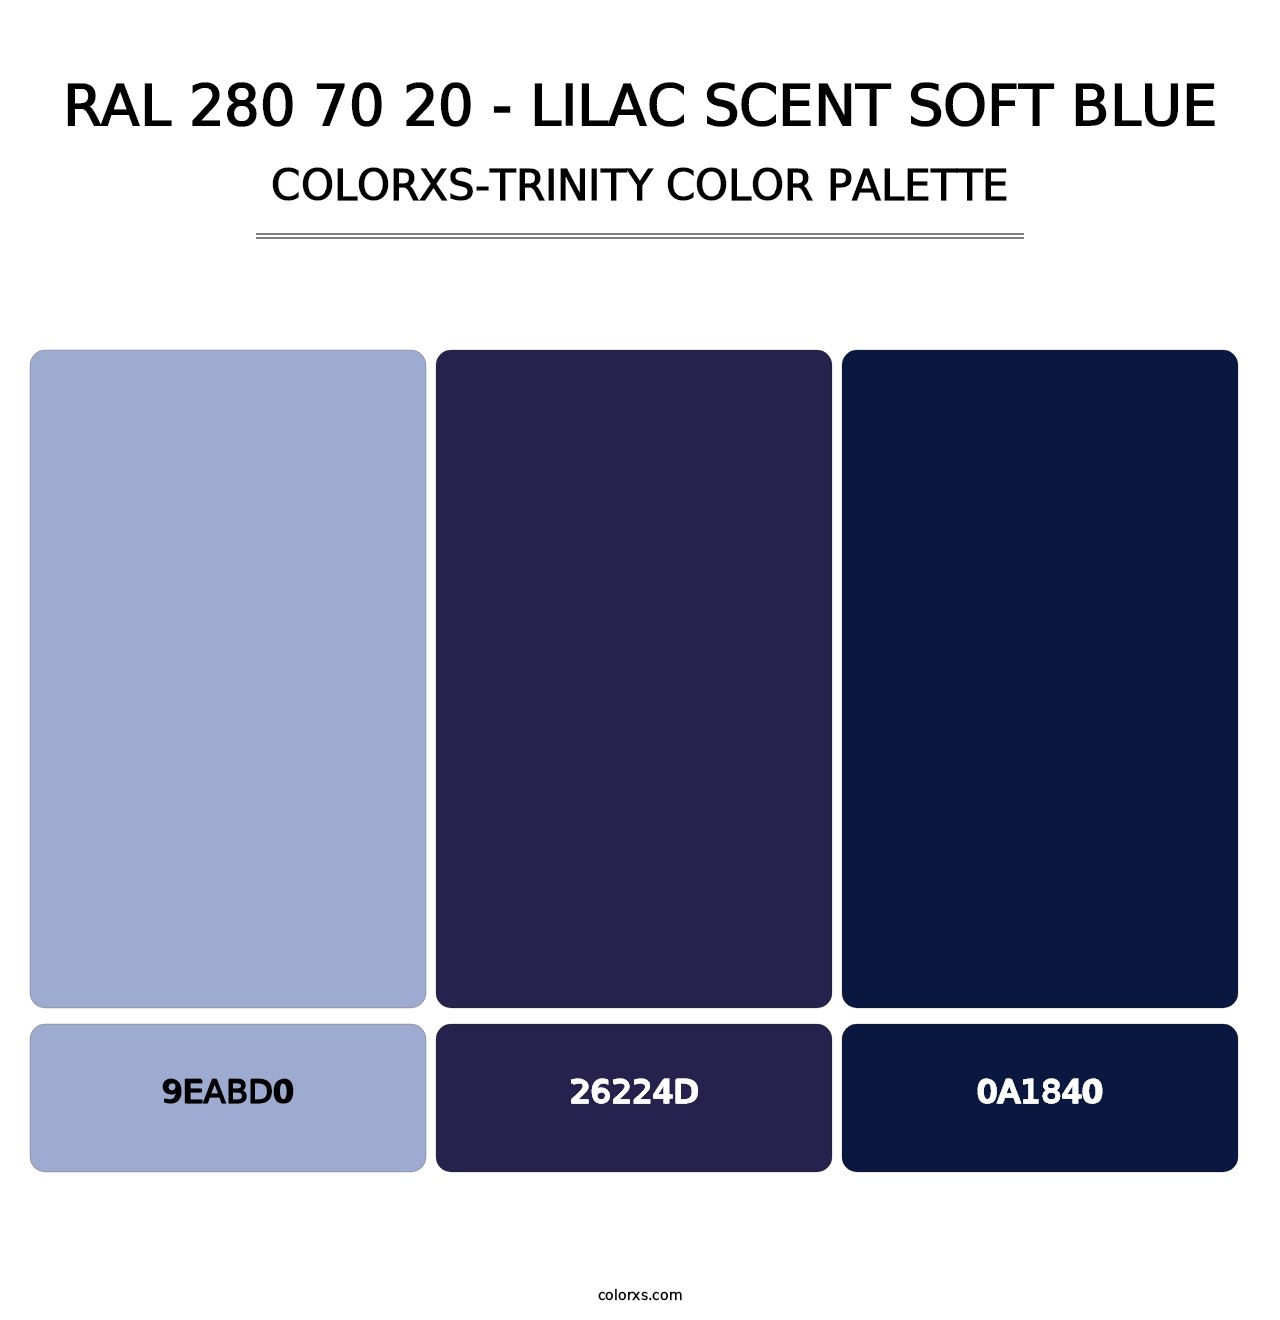 RAL 280 70 20 - Lilac Scent Soft Blue - Colorxs Trinity Palette